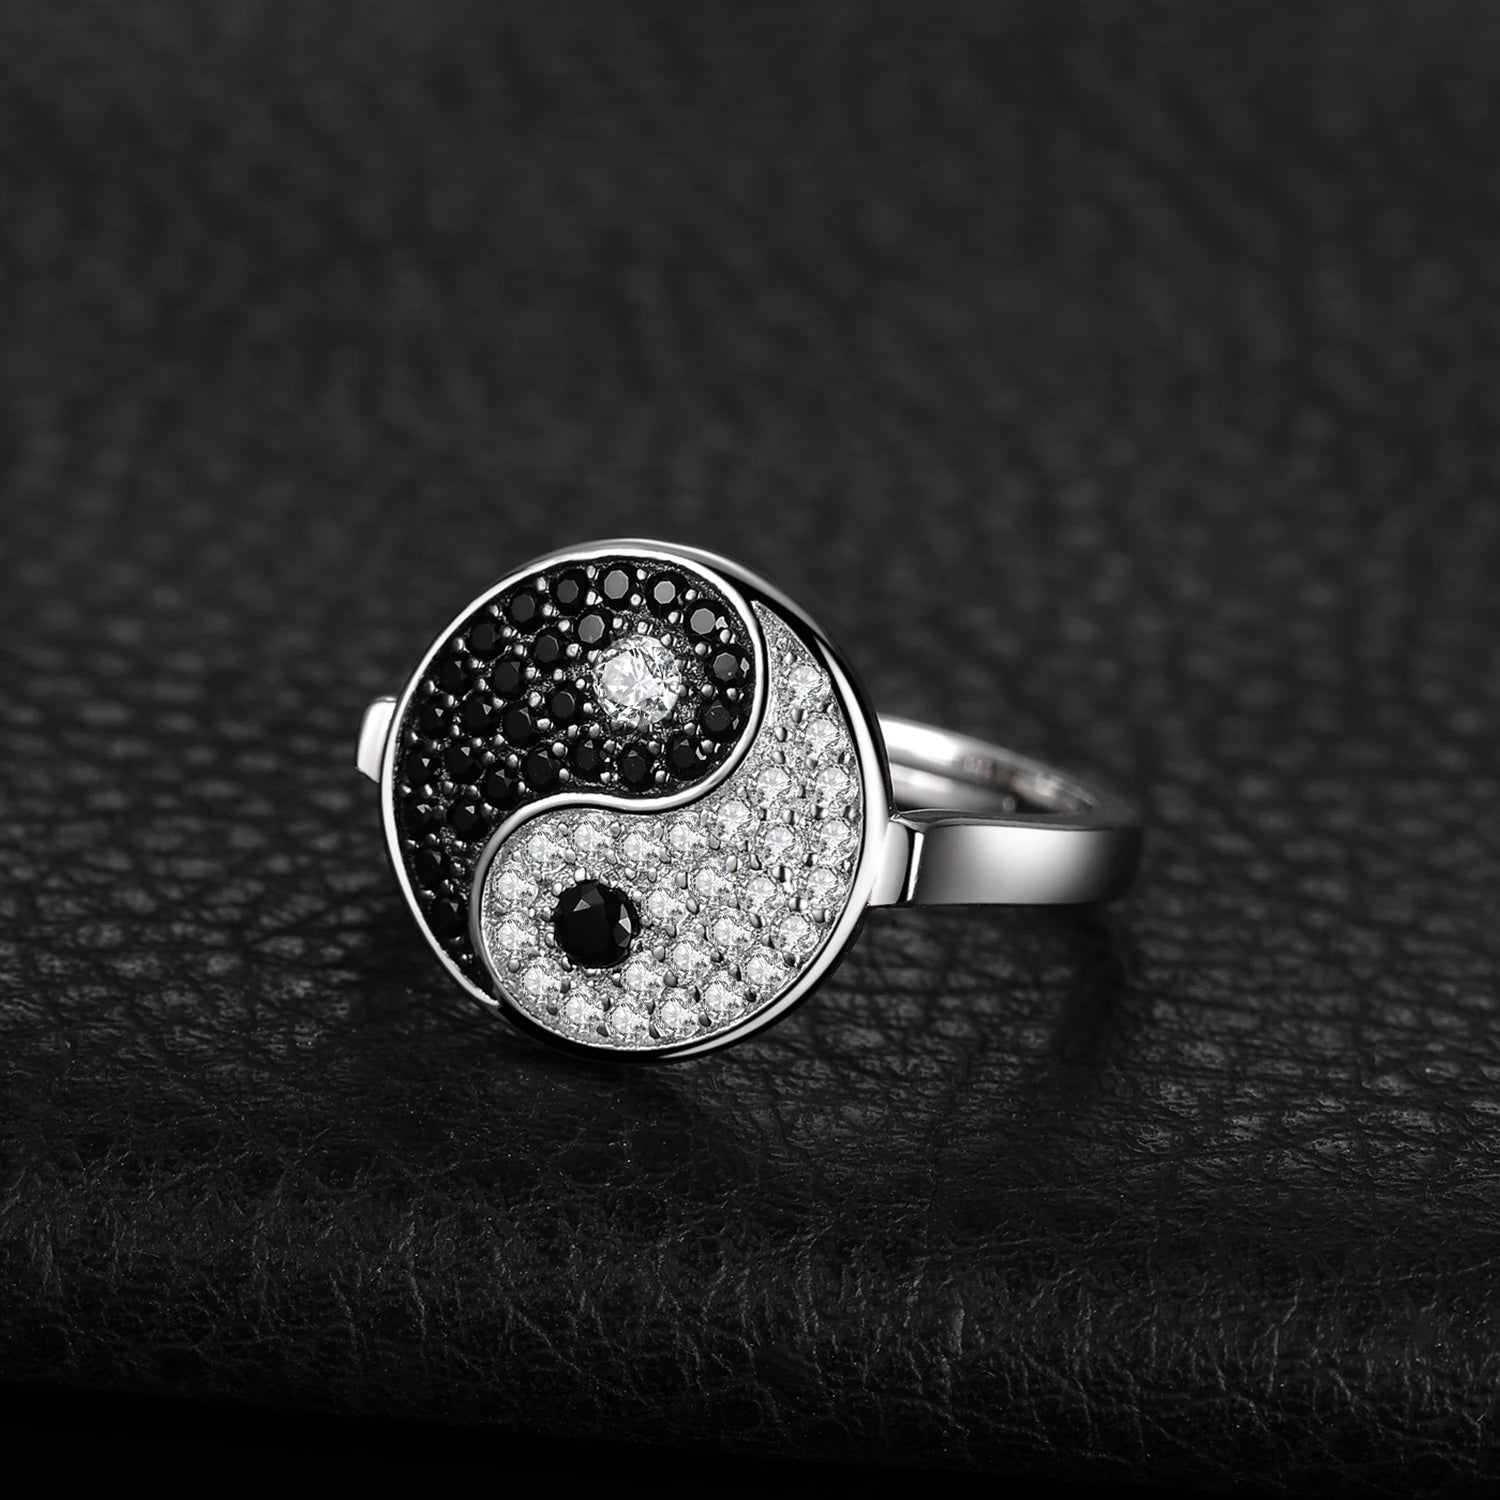 JewelryPalace Tai Chi Yin Yang 925 Sterling Silver Adjustable Ring Unique Genuine Black Spinel Statement Open Rings for Women